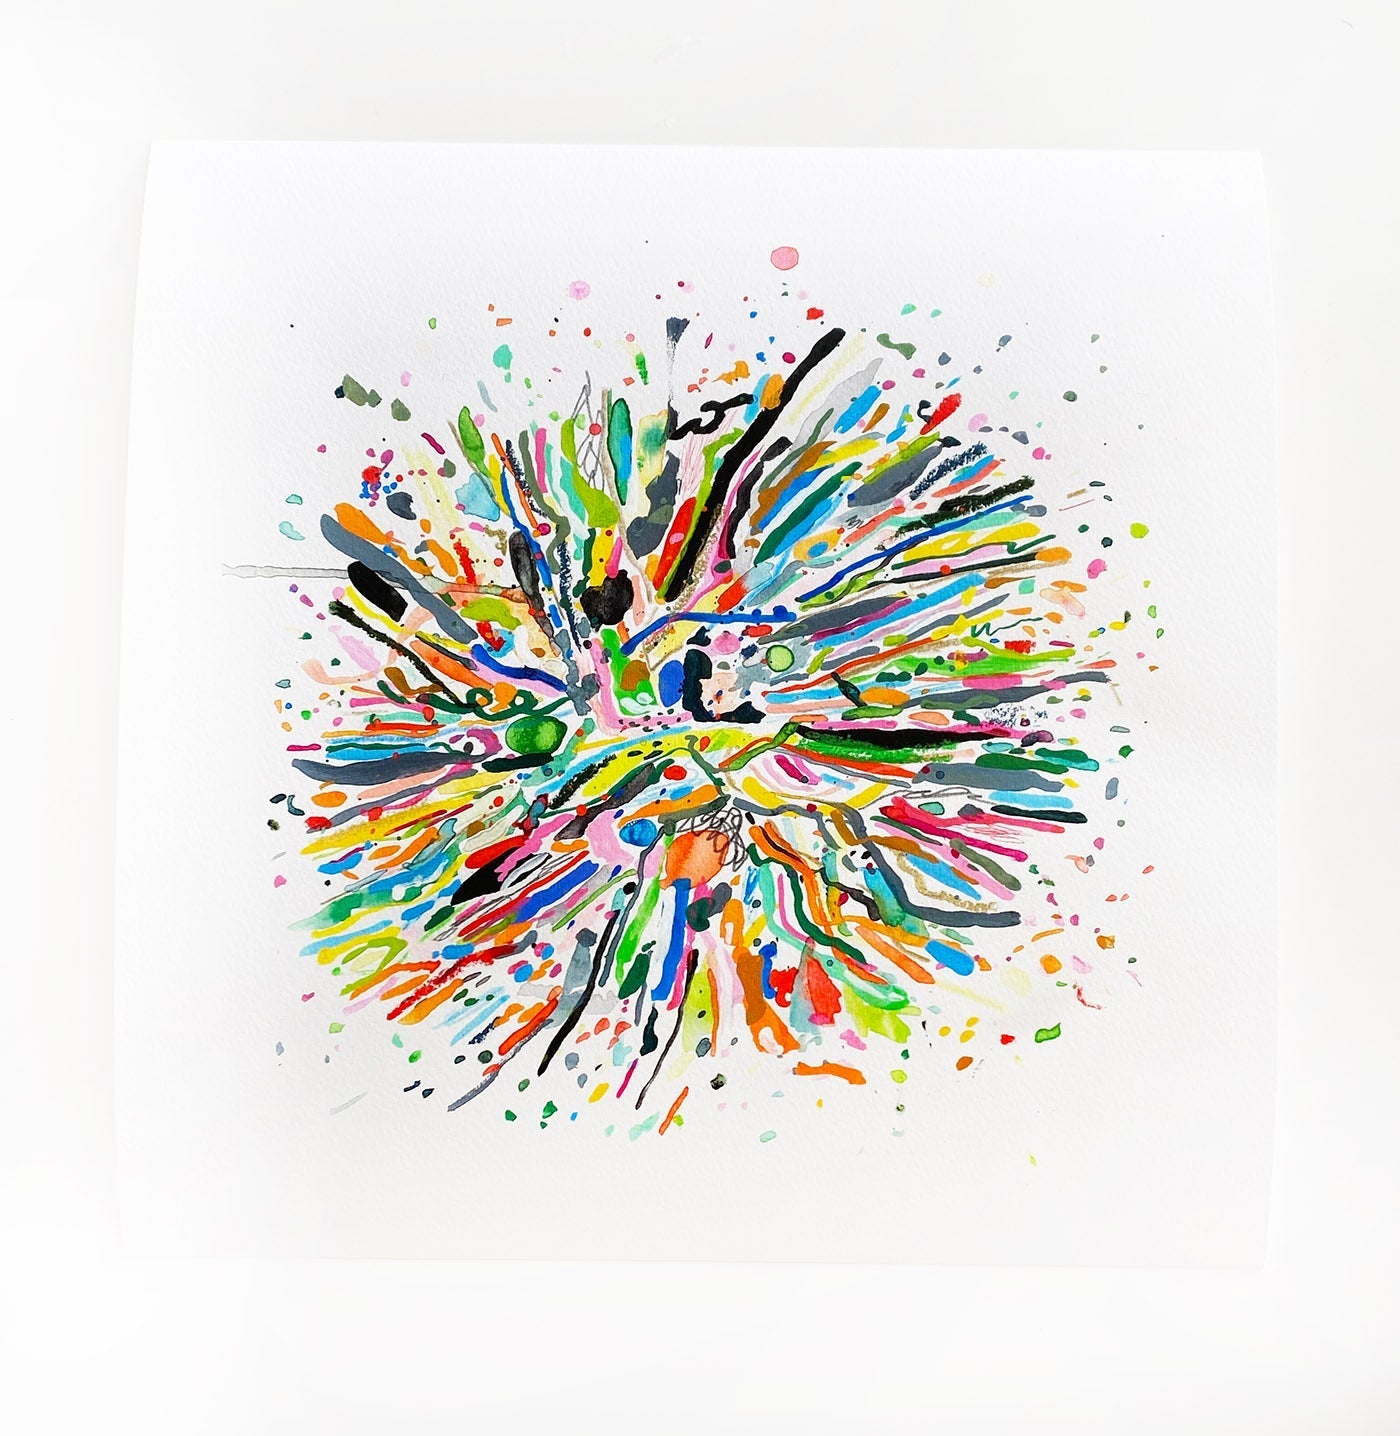 IMPERFECT 'Burst 03' - Limited Edition Giclee Print